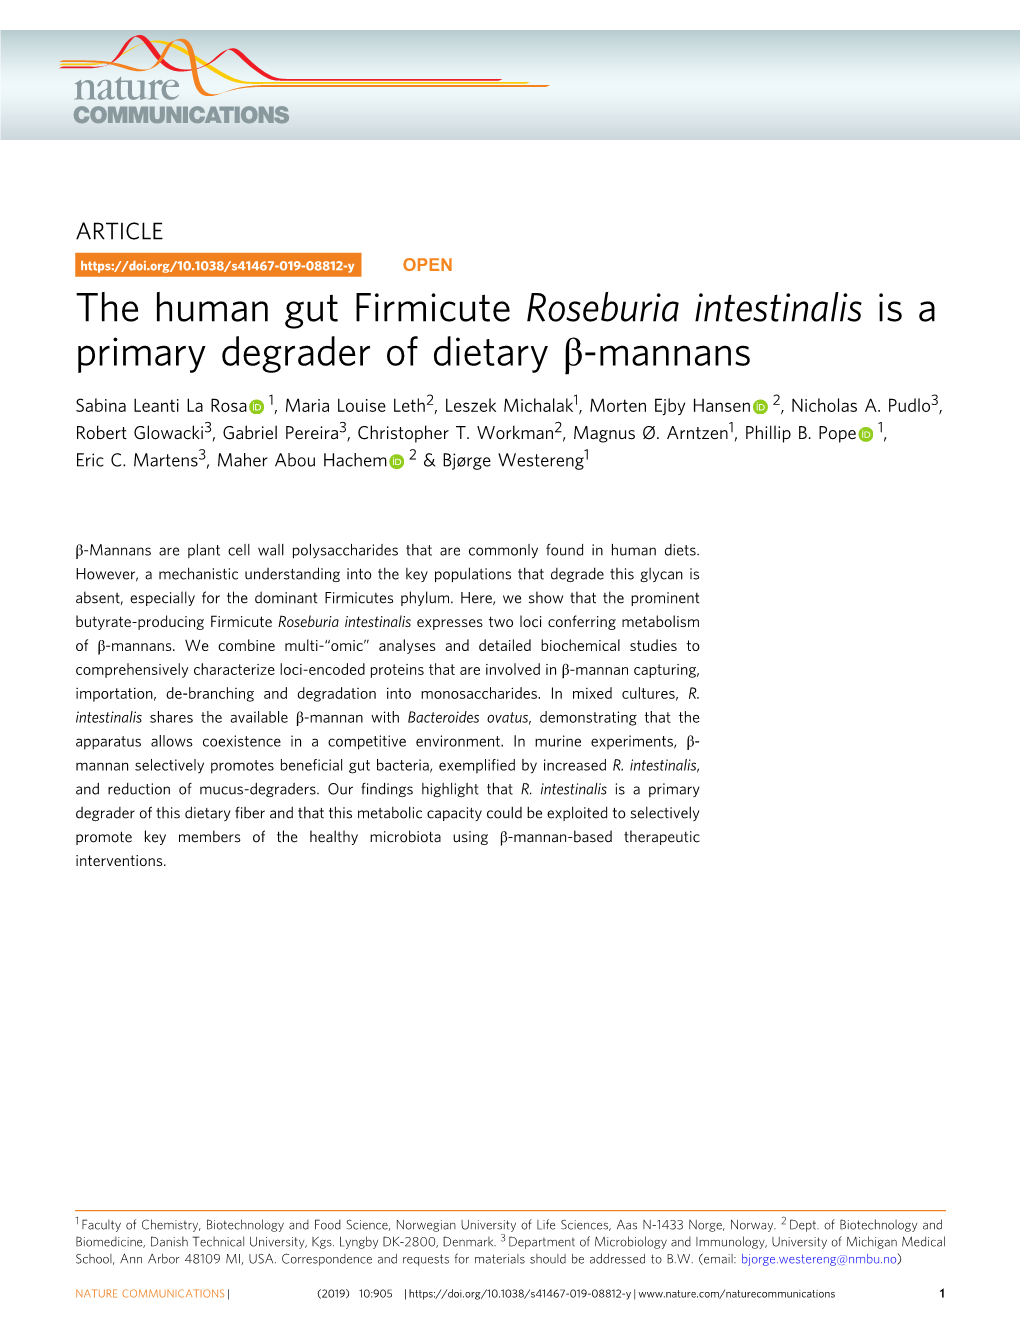 The Human Gut Firmicute Roseburia Intestinalis Is a Primary Degrader of Dietary Β-Mannans